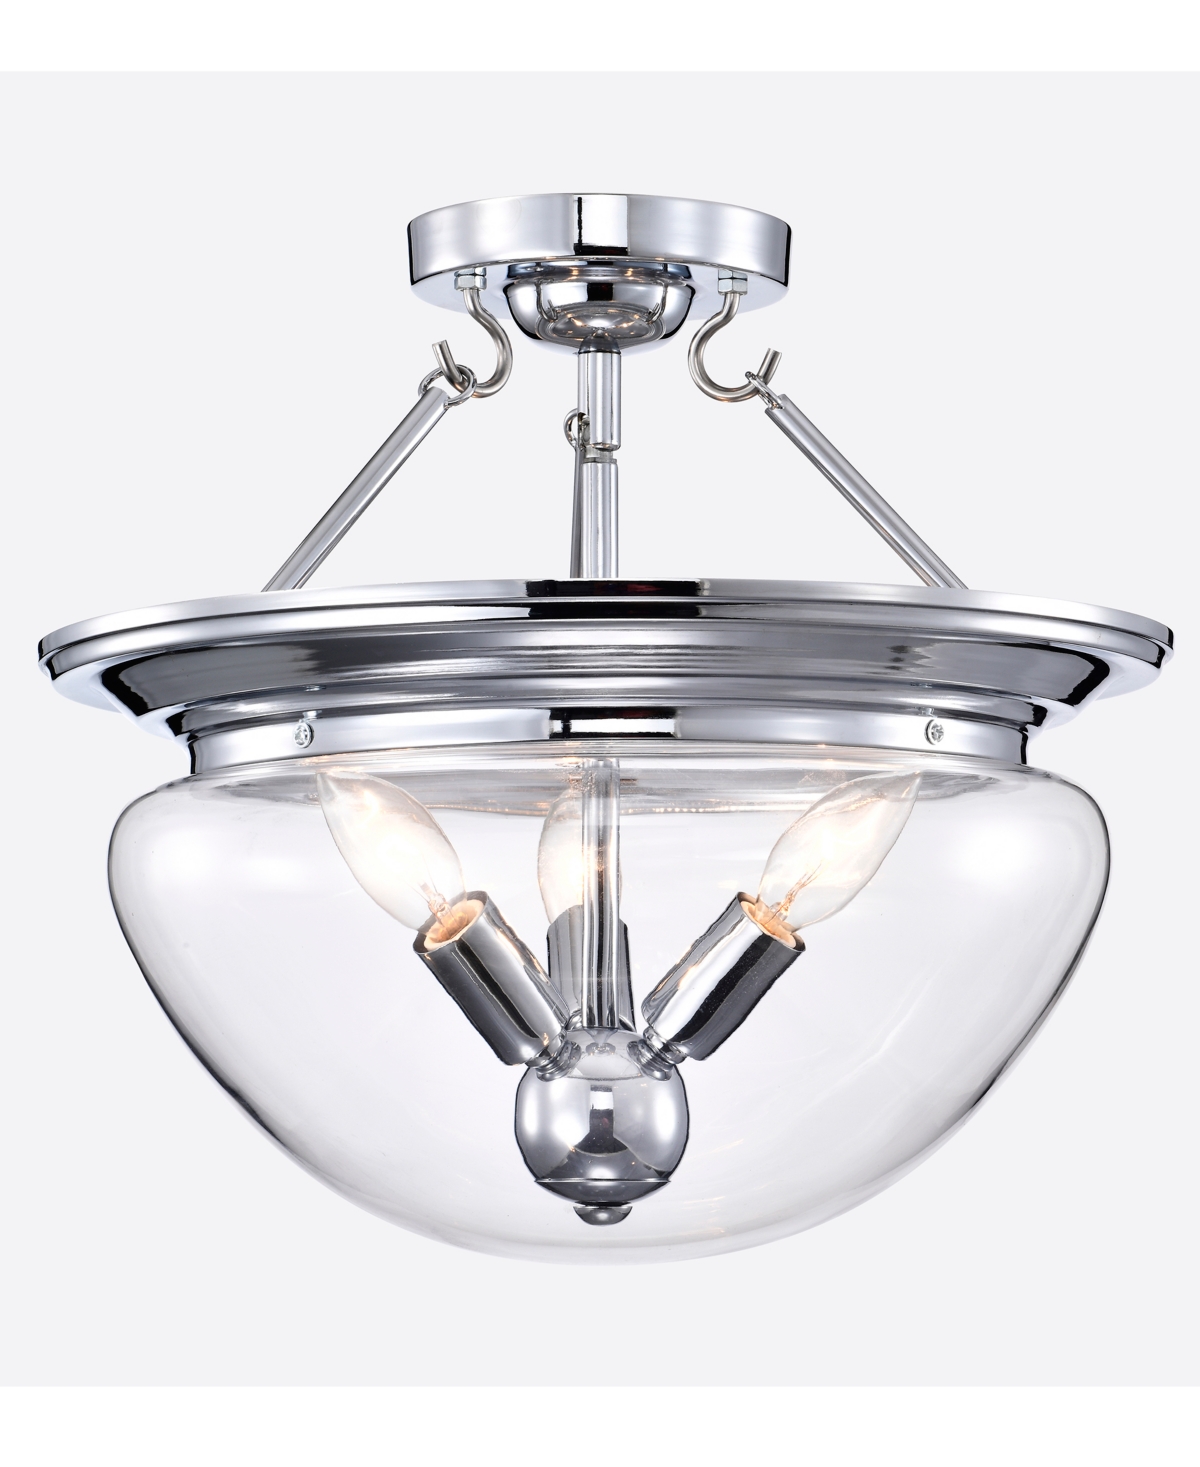 Home Accessories Latona 15" 3-light Indoor Semi-flush Mount Ceiling Light With Light Kit And Remote In Polished Chrome